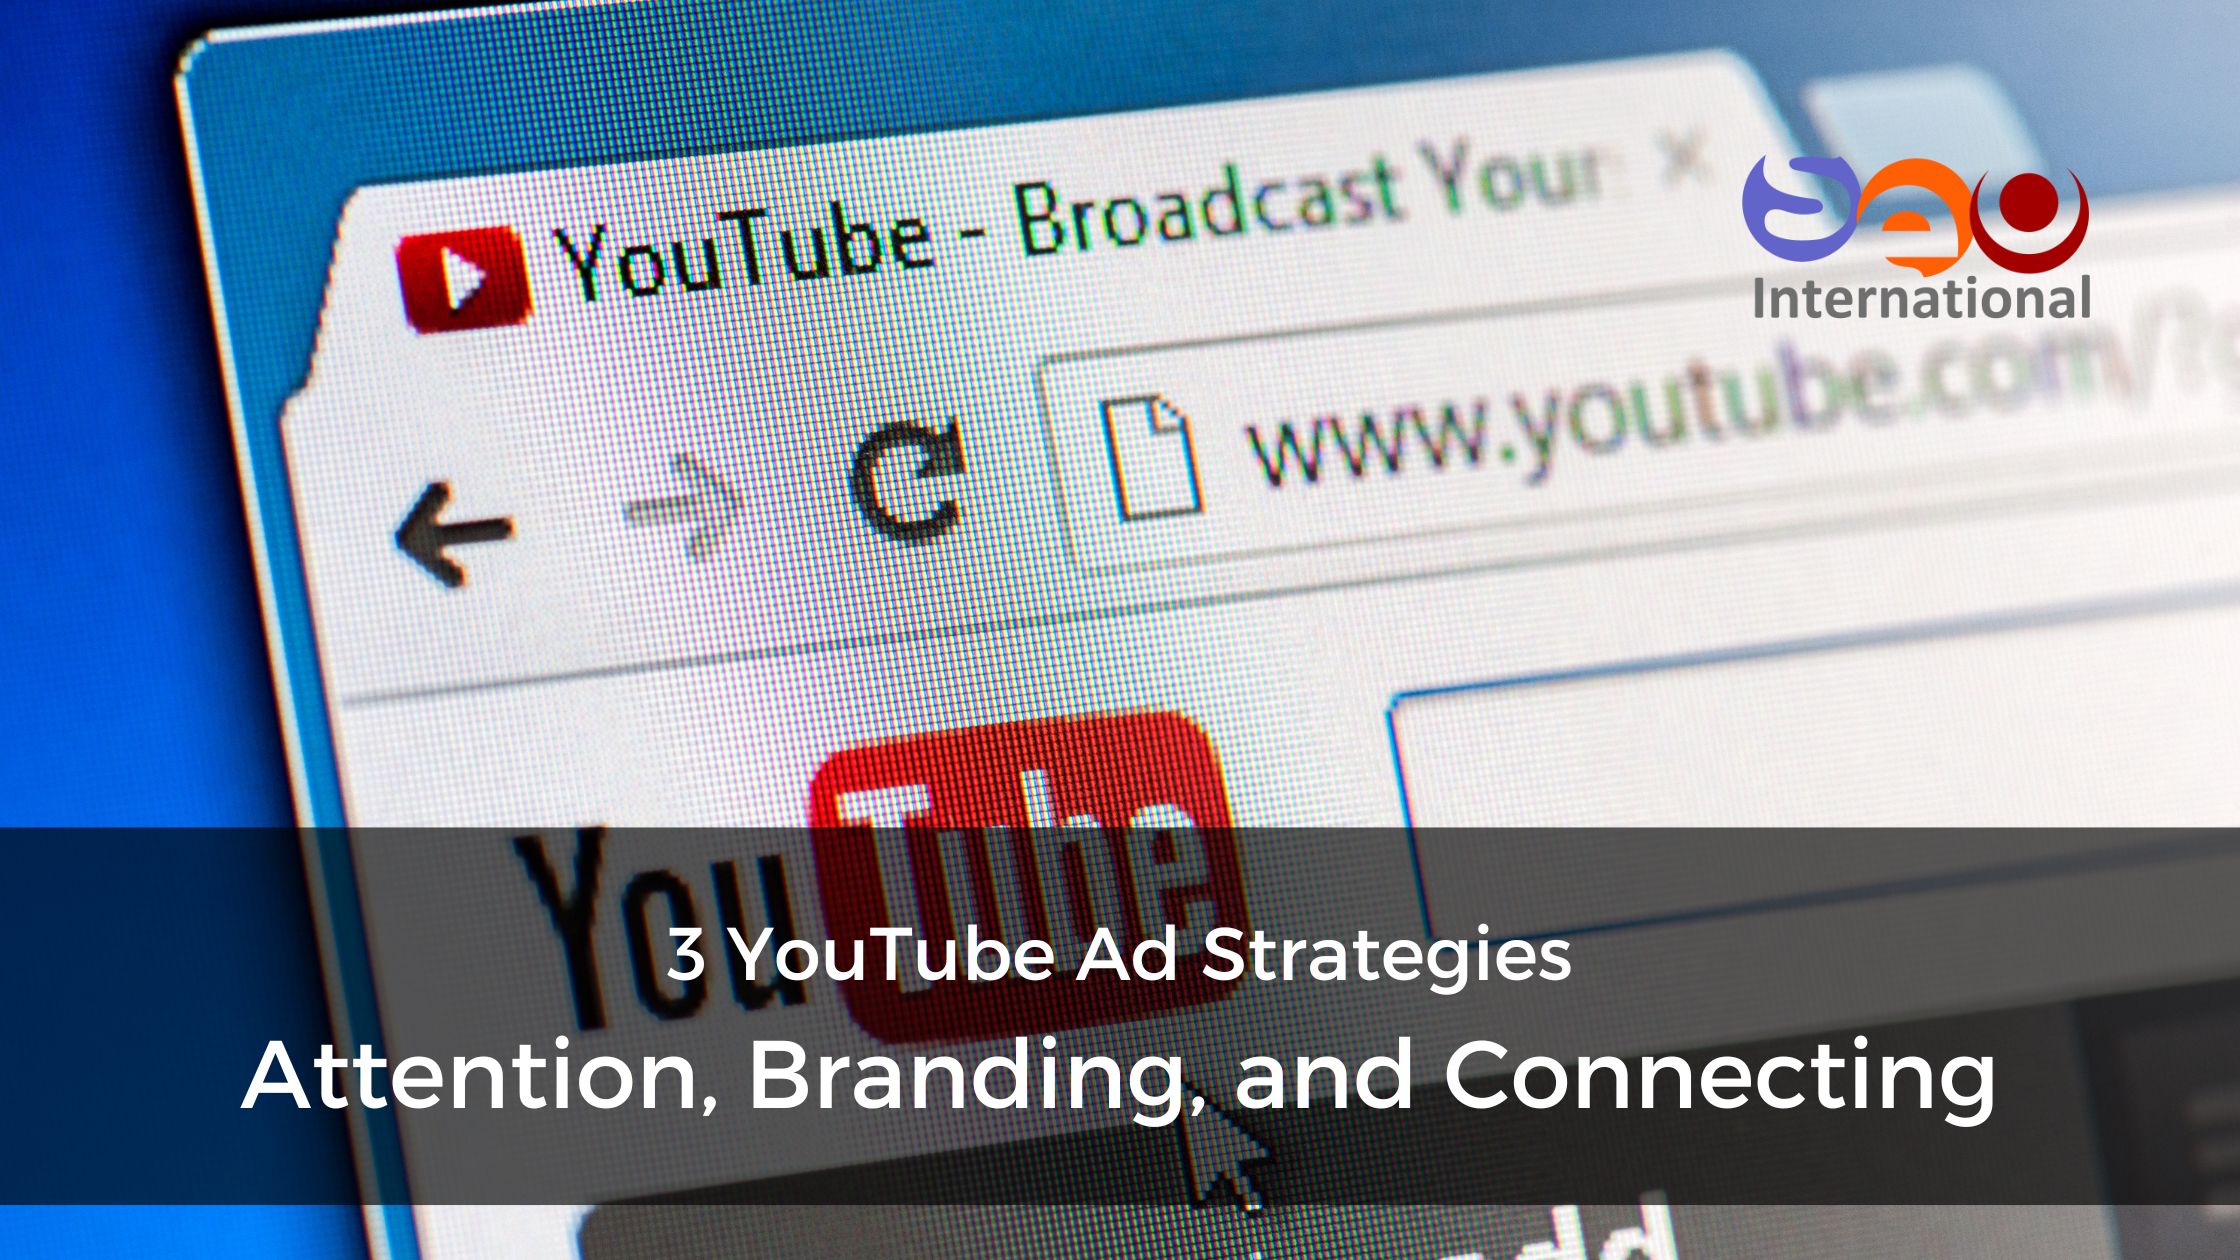 3 YouTube Ads Strategies - Attention, Branding, and Connecting